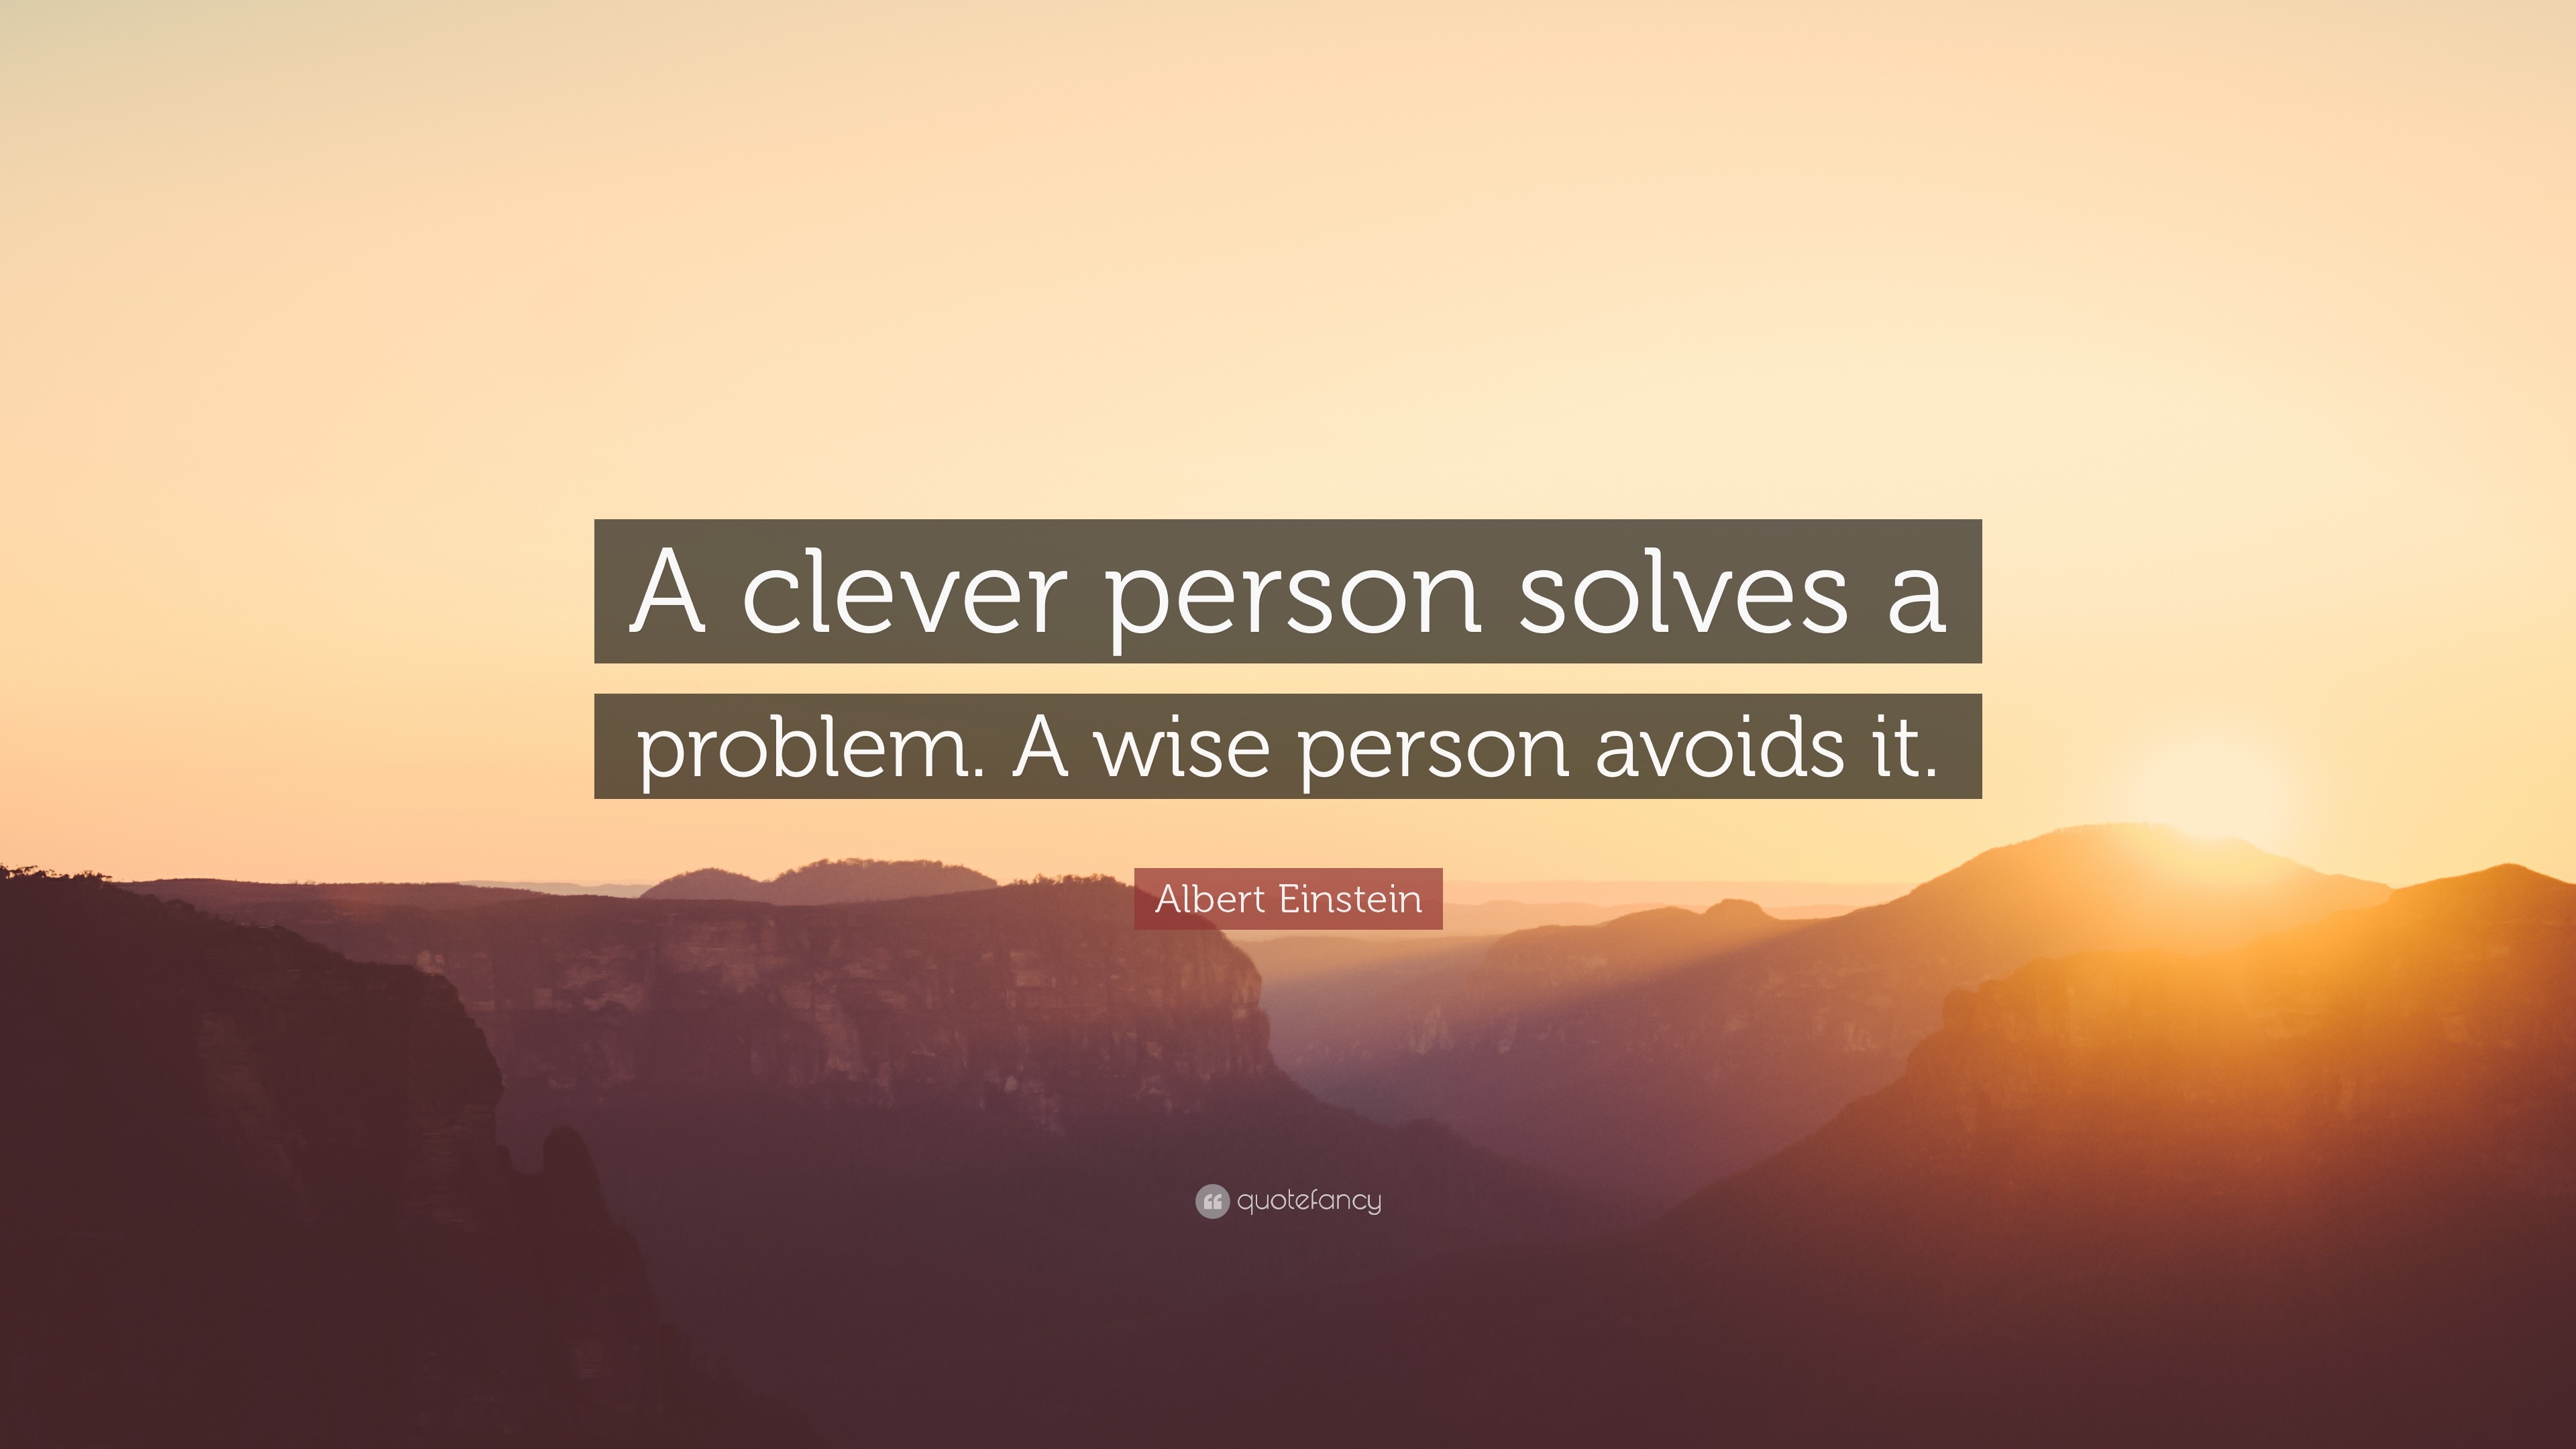 Albert Einstein Quote “A clever person solves a problem A wise person avoids